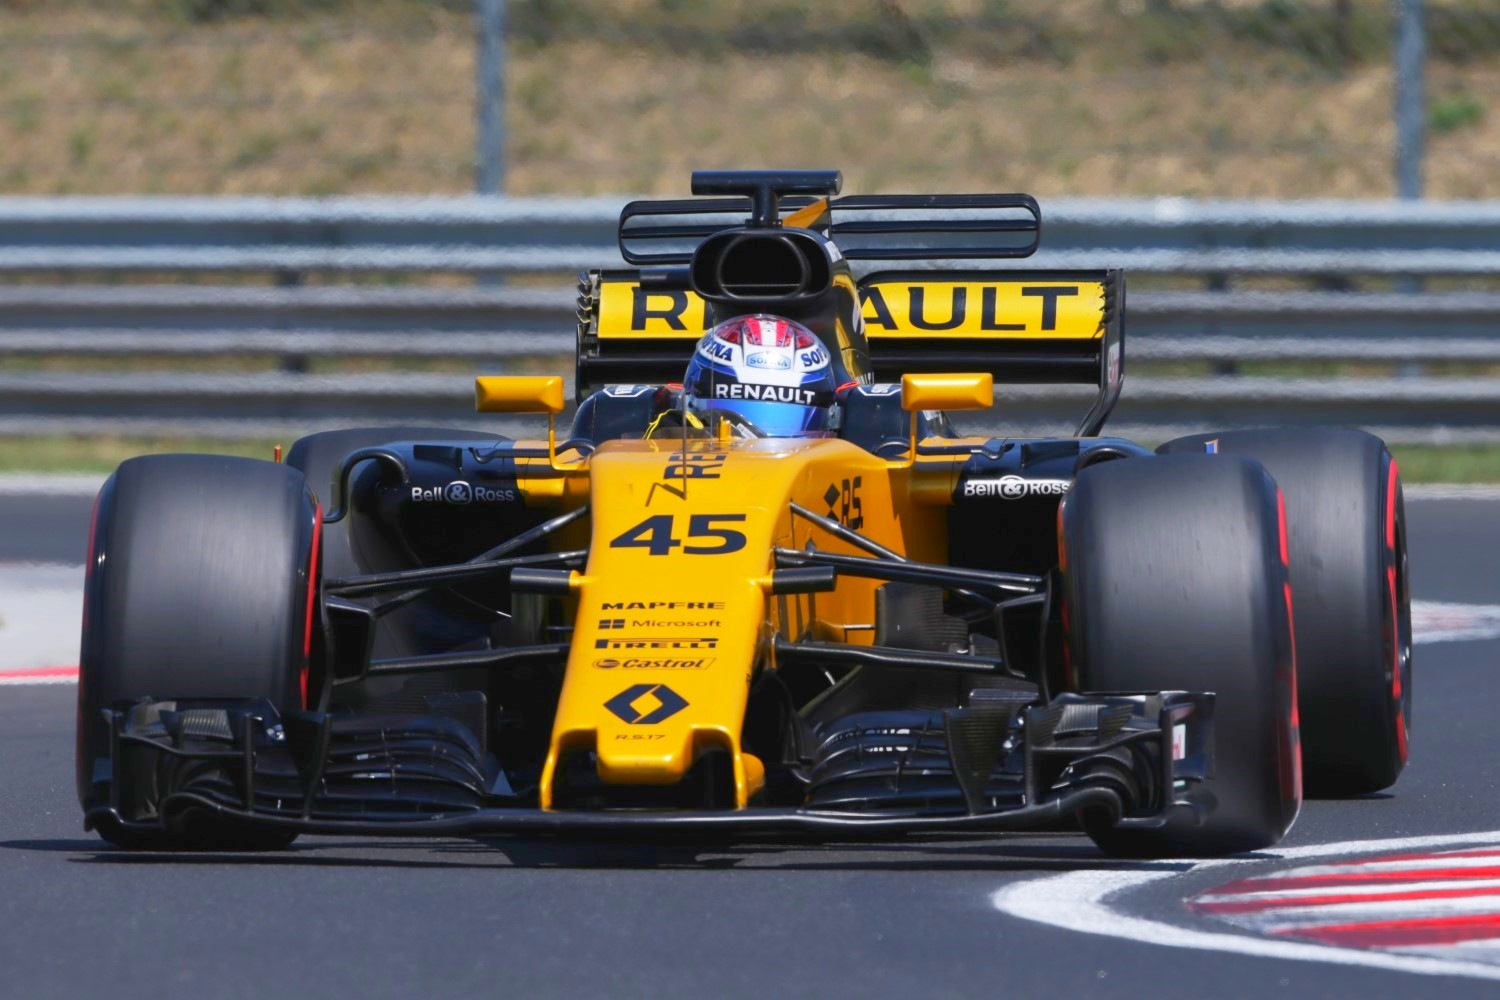 Latifi was in the car today, but tomorrow Kubica gets his chance